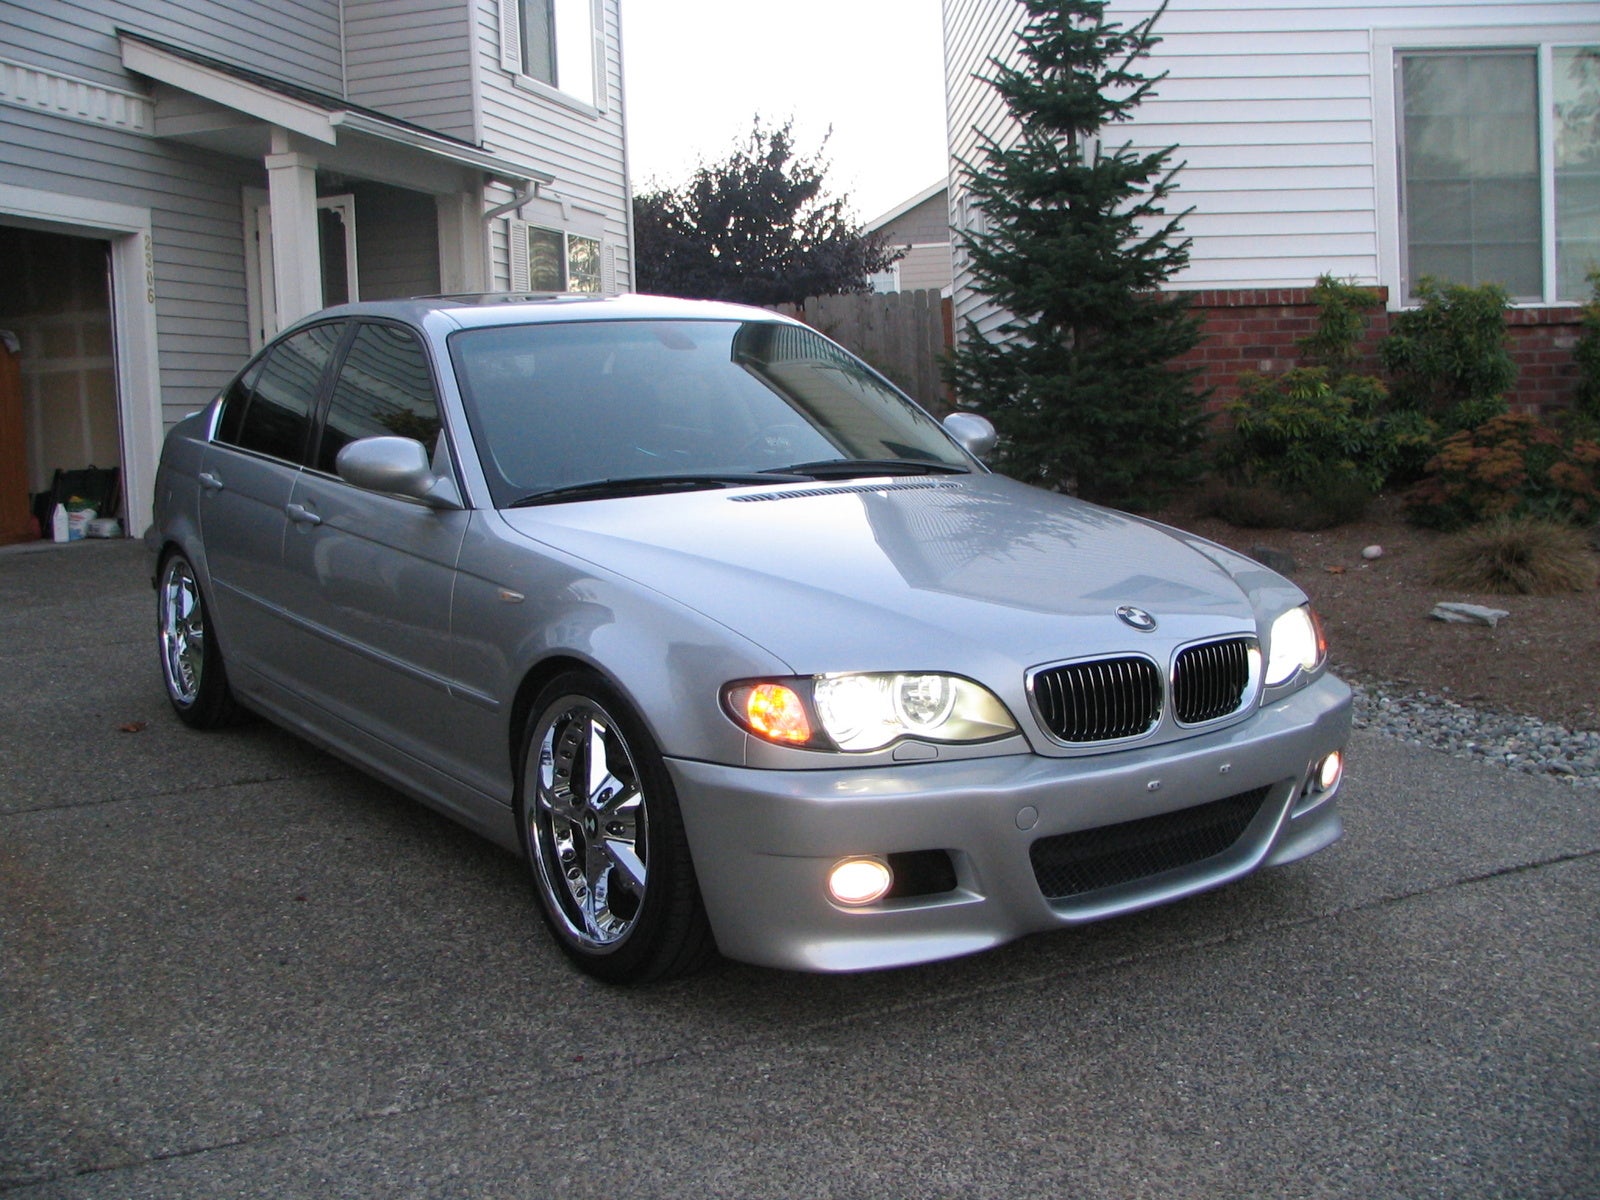 2003 Series on 2003 Bmw 330 330xi Picture View Garage Jas Owns This Bmw 3 Series